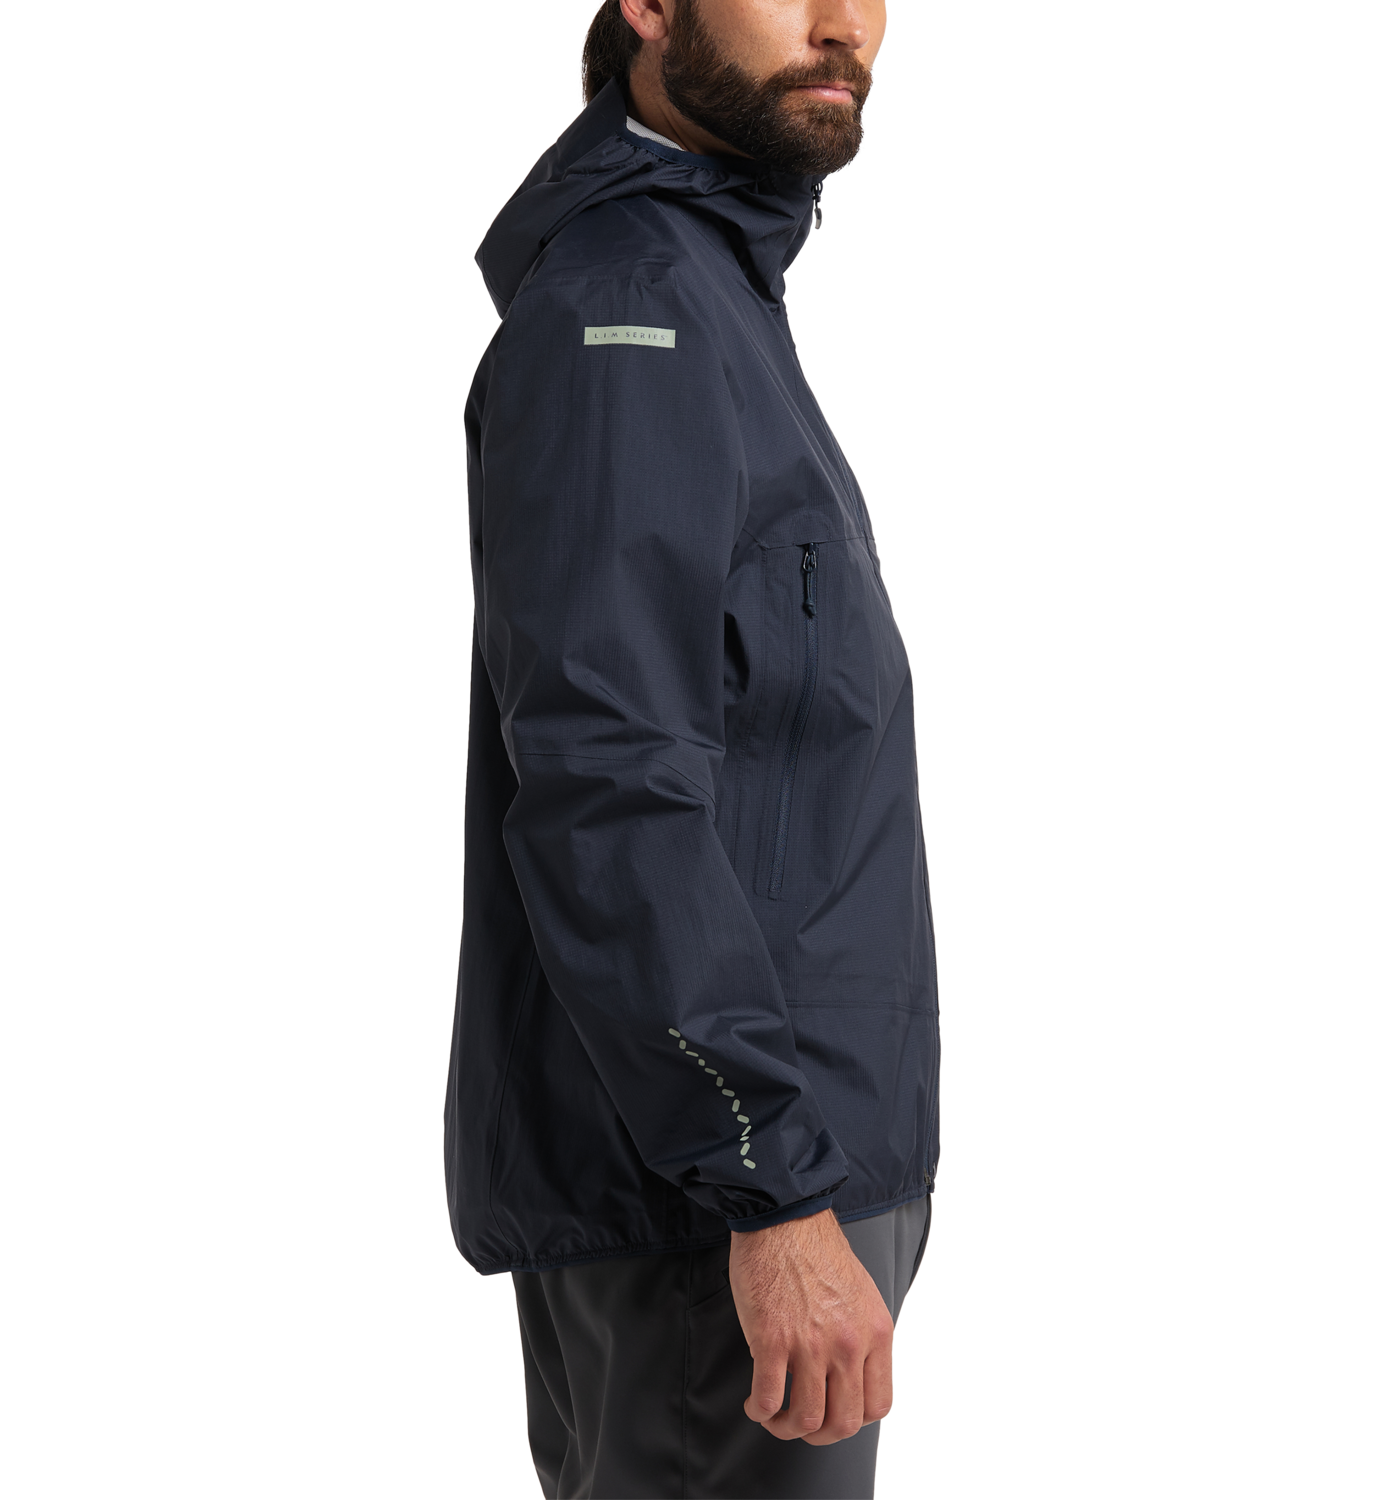 Jutec HSJ080KA-1 Jacket at best price in Raigad by Axis Safety Udyog | ID:  26025505173